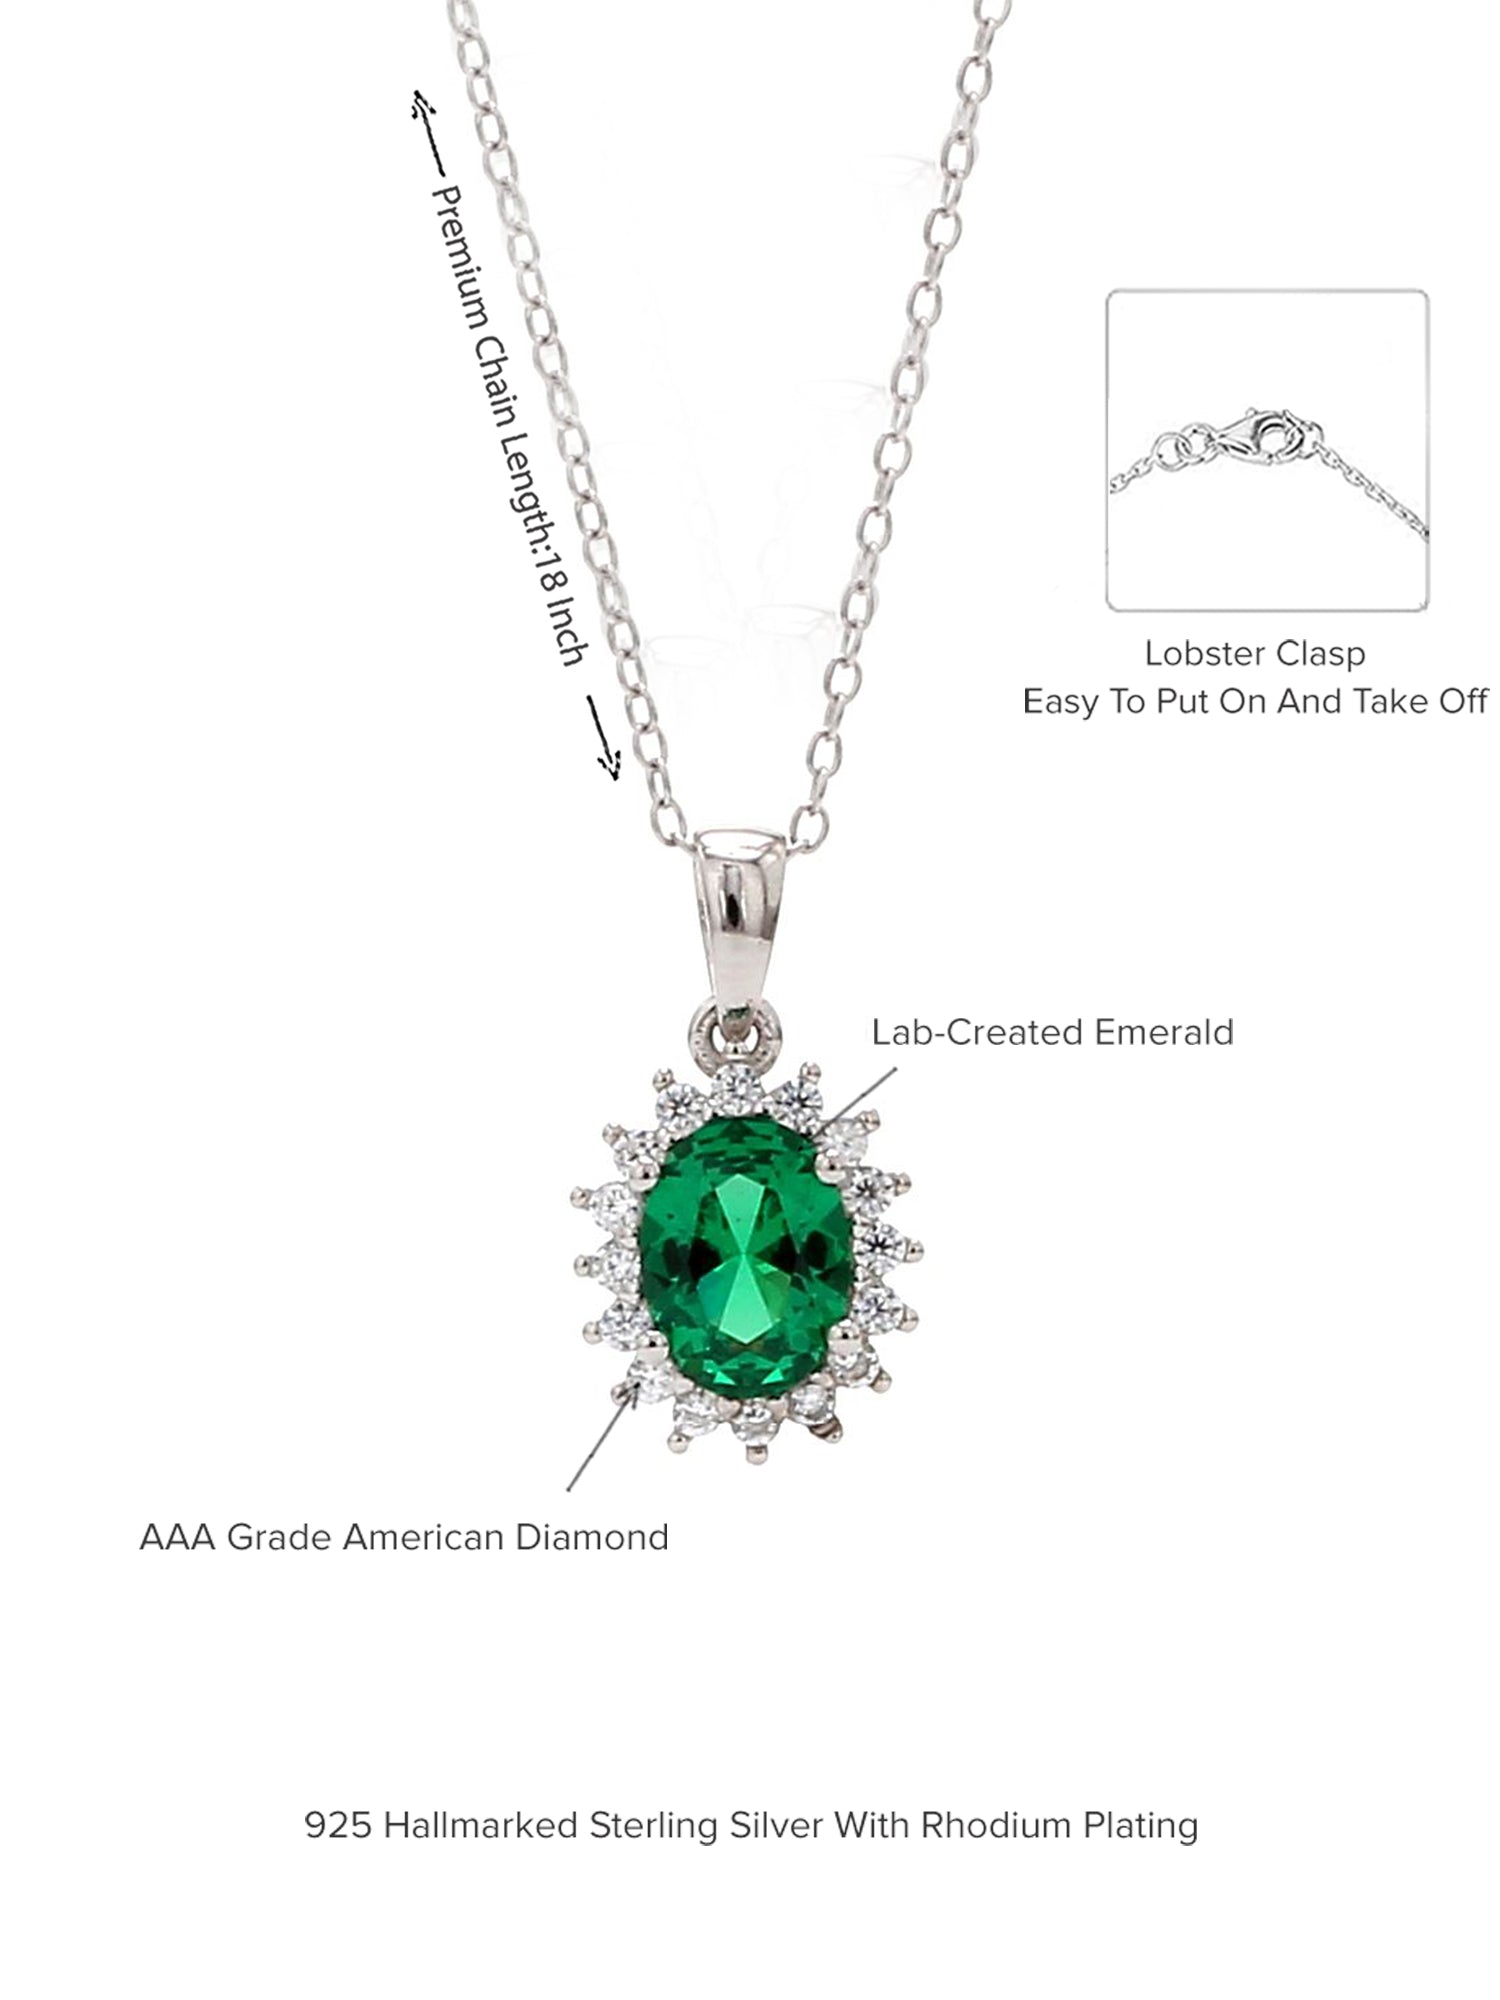 STERLING SILVER GREEN EMERALD HALO OVAL PENDANT-6